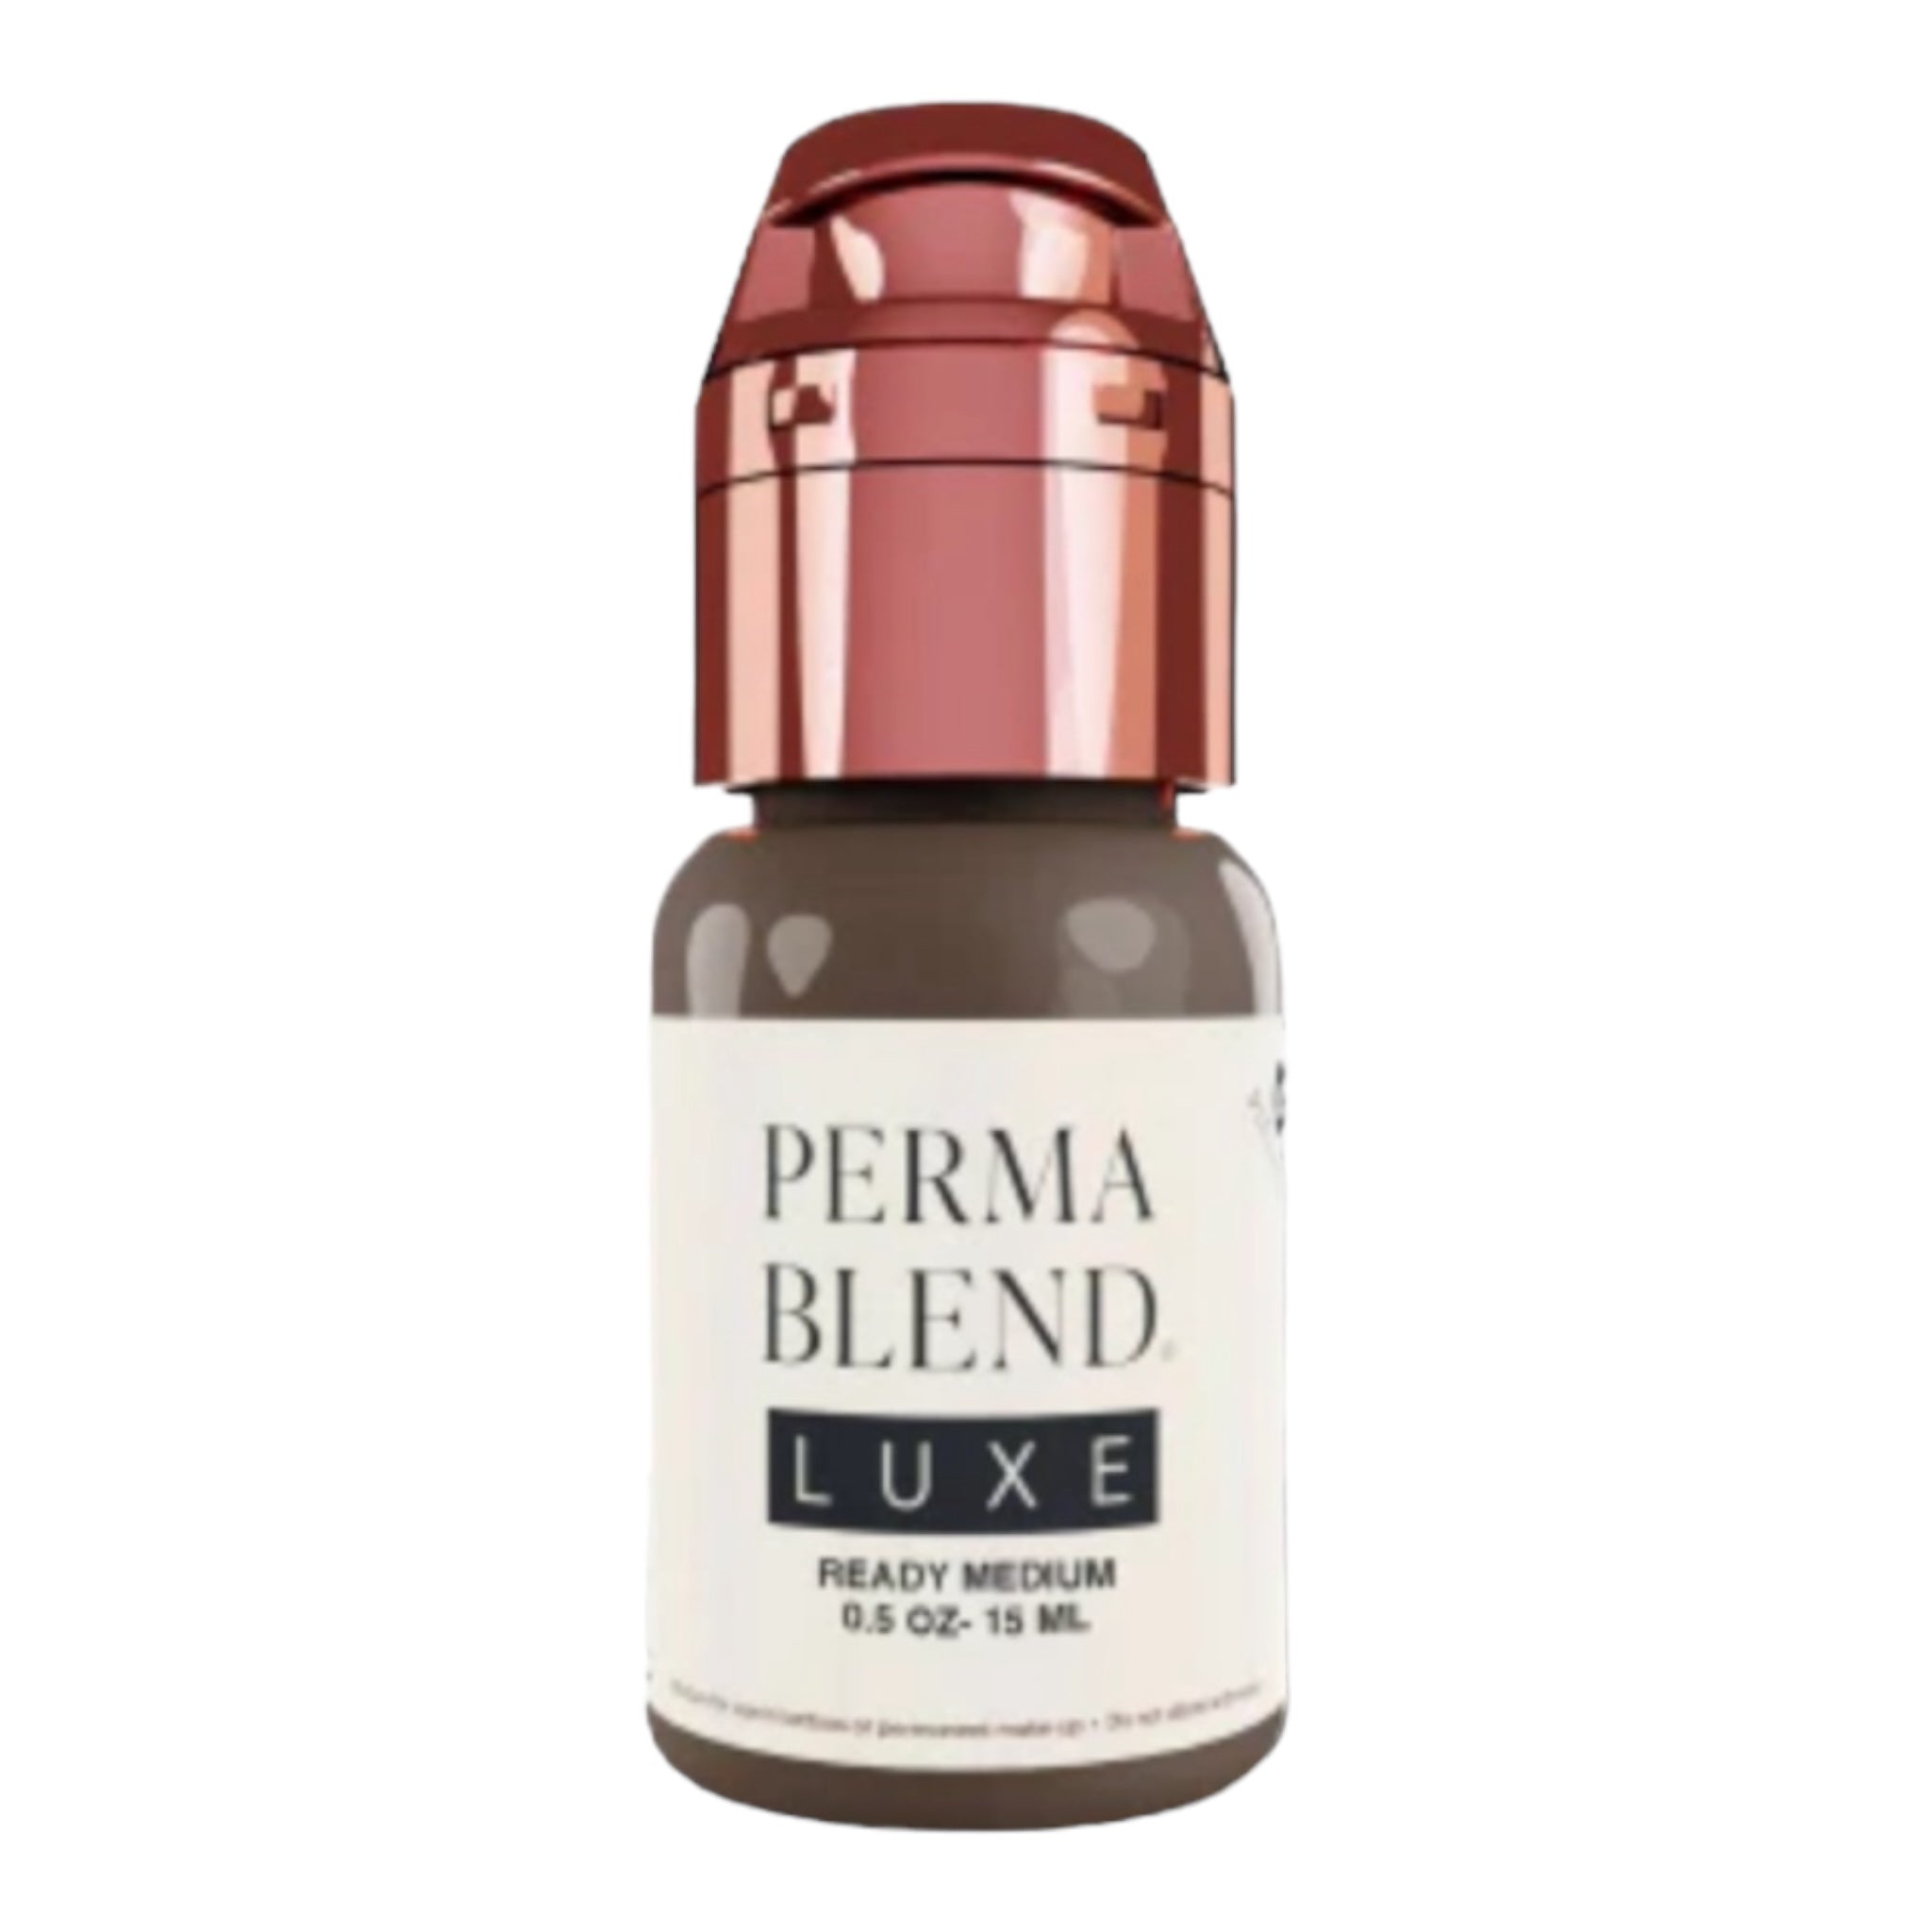 Encre Maquillage Perma Blend Luxe 15ml - Ready Medium